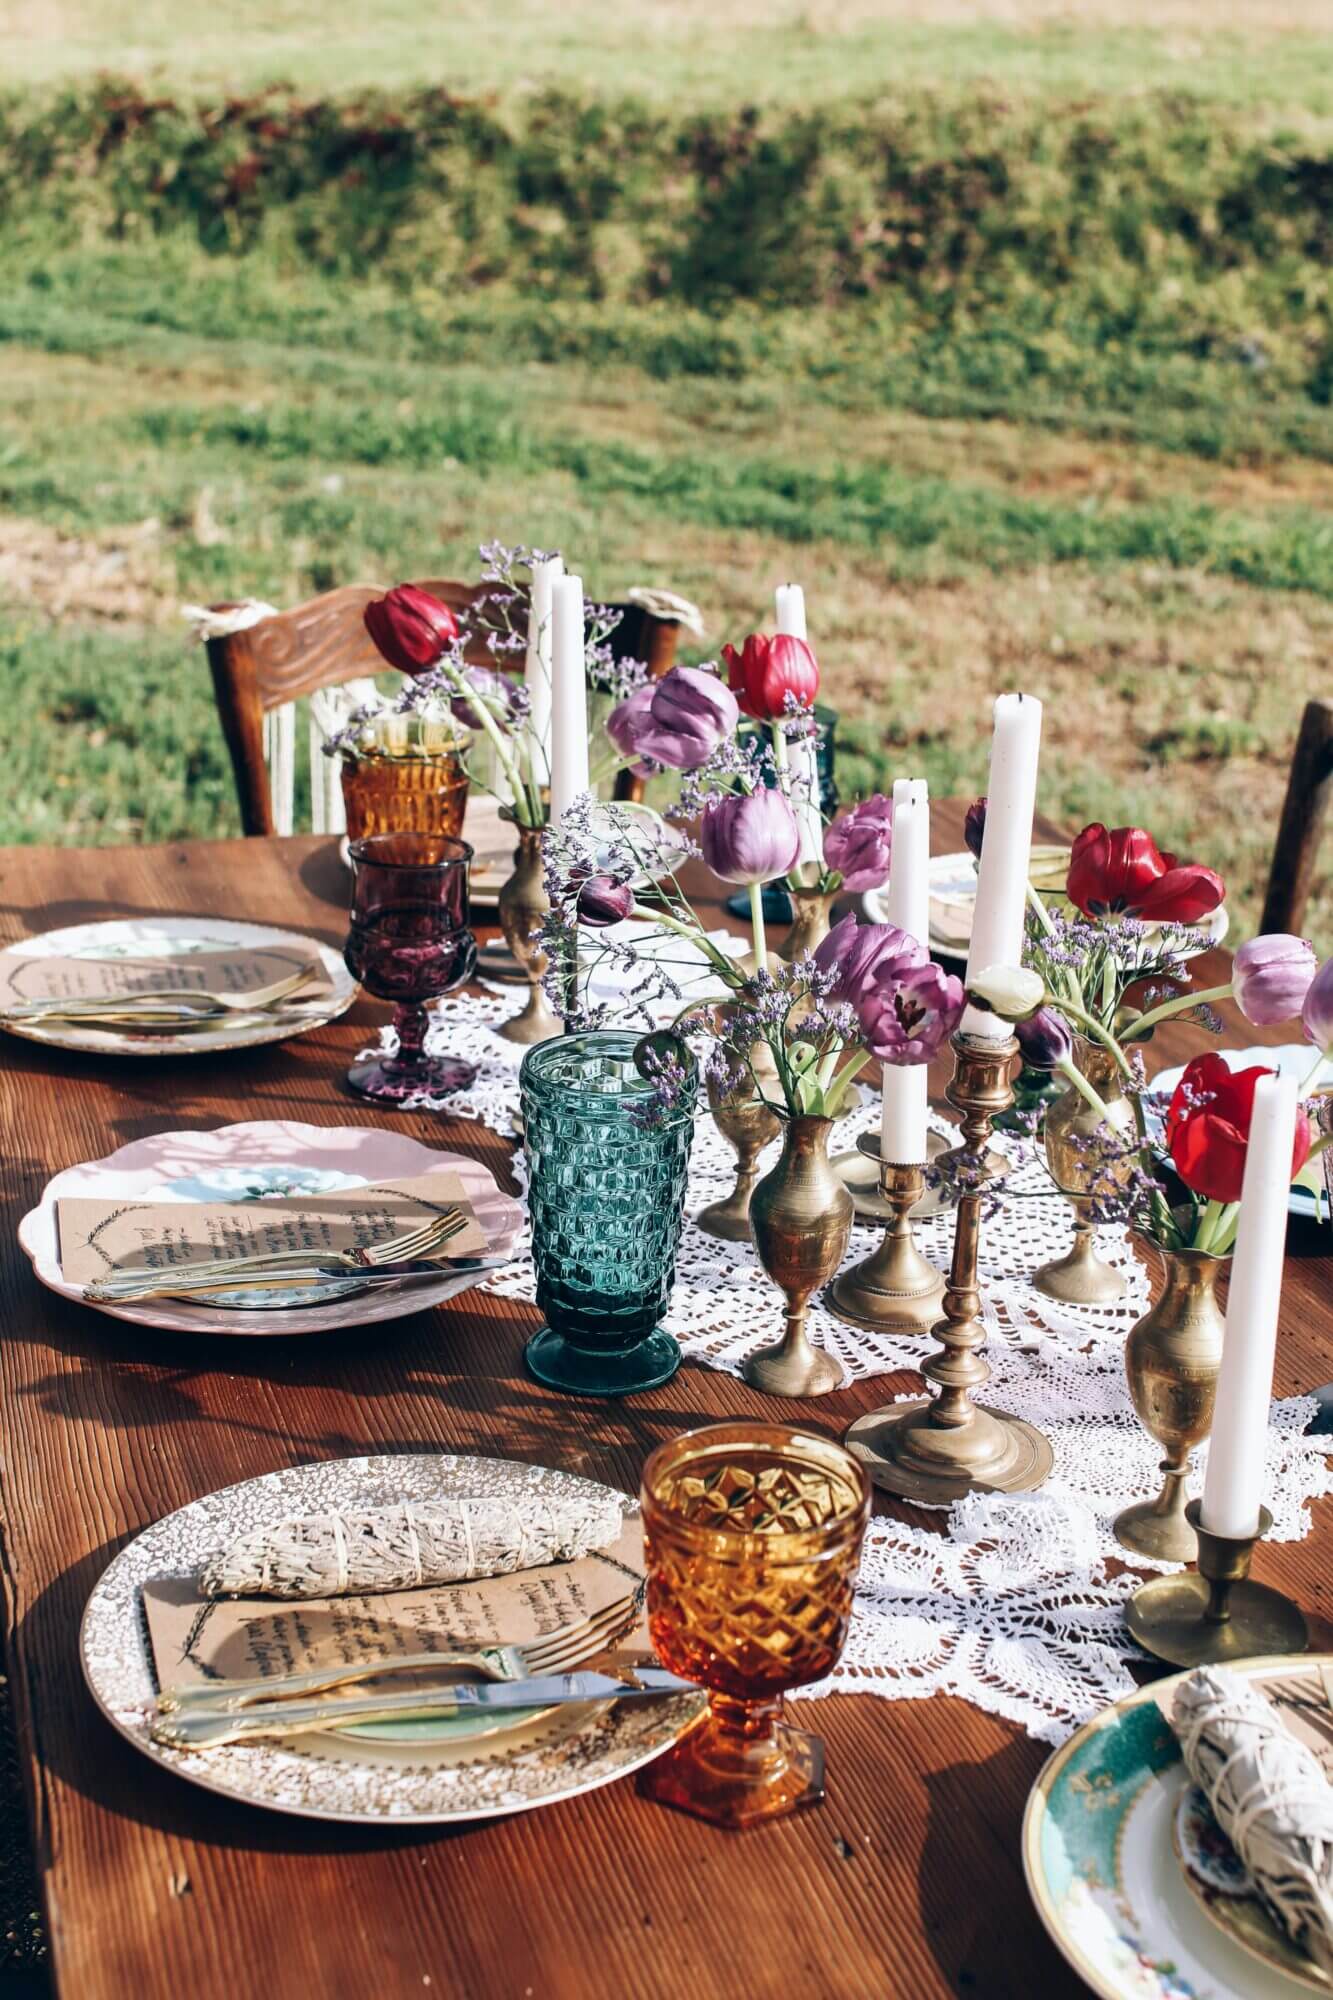 A table set with plates and glasses in a field.